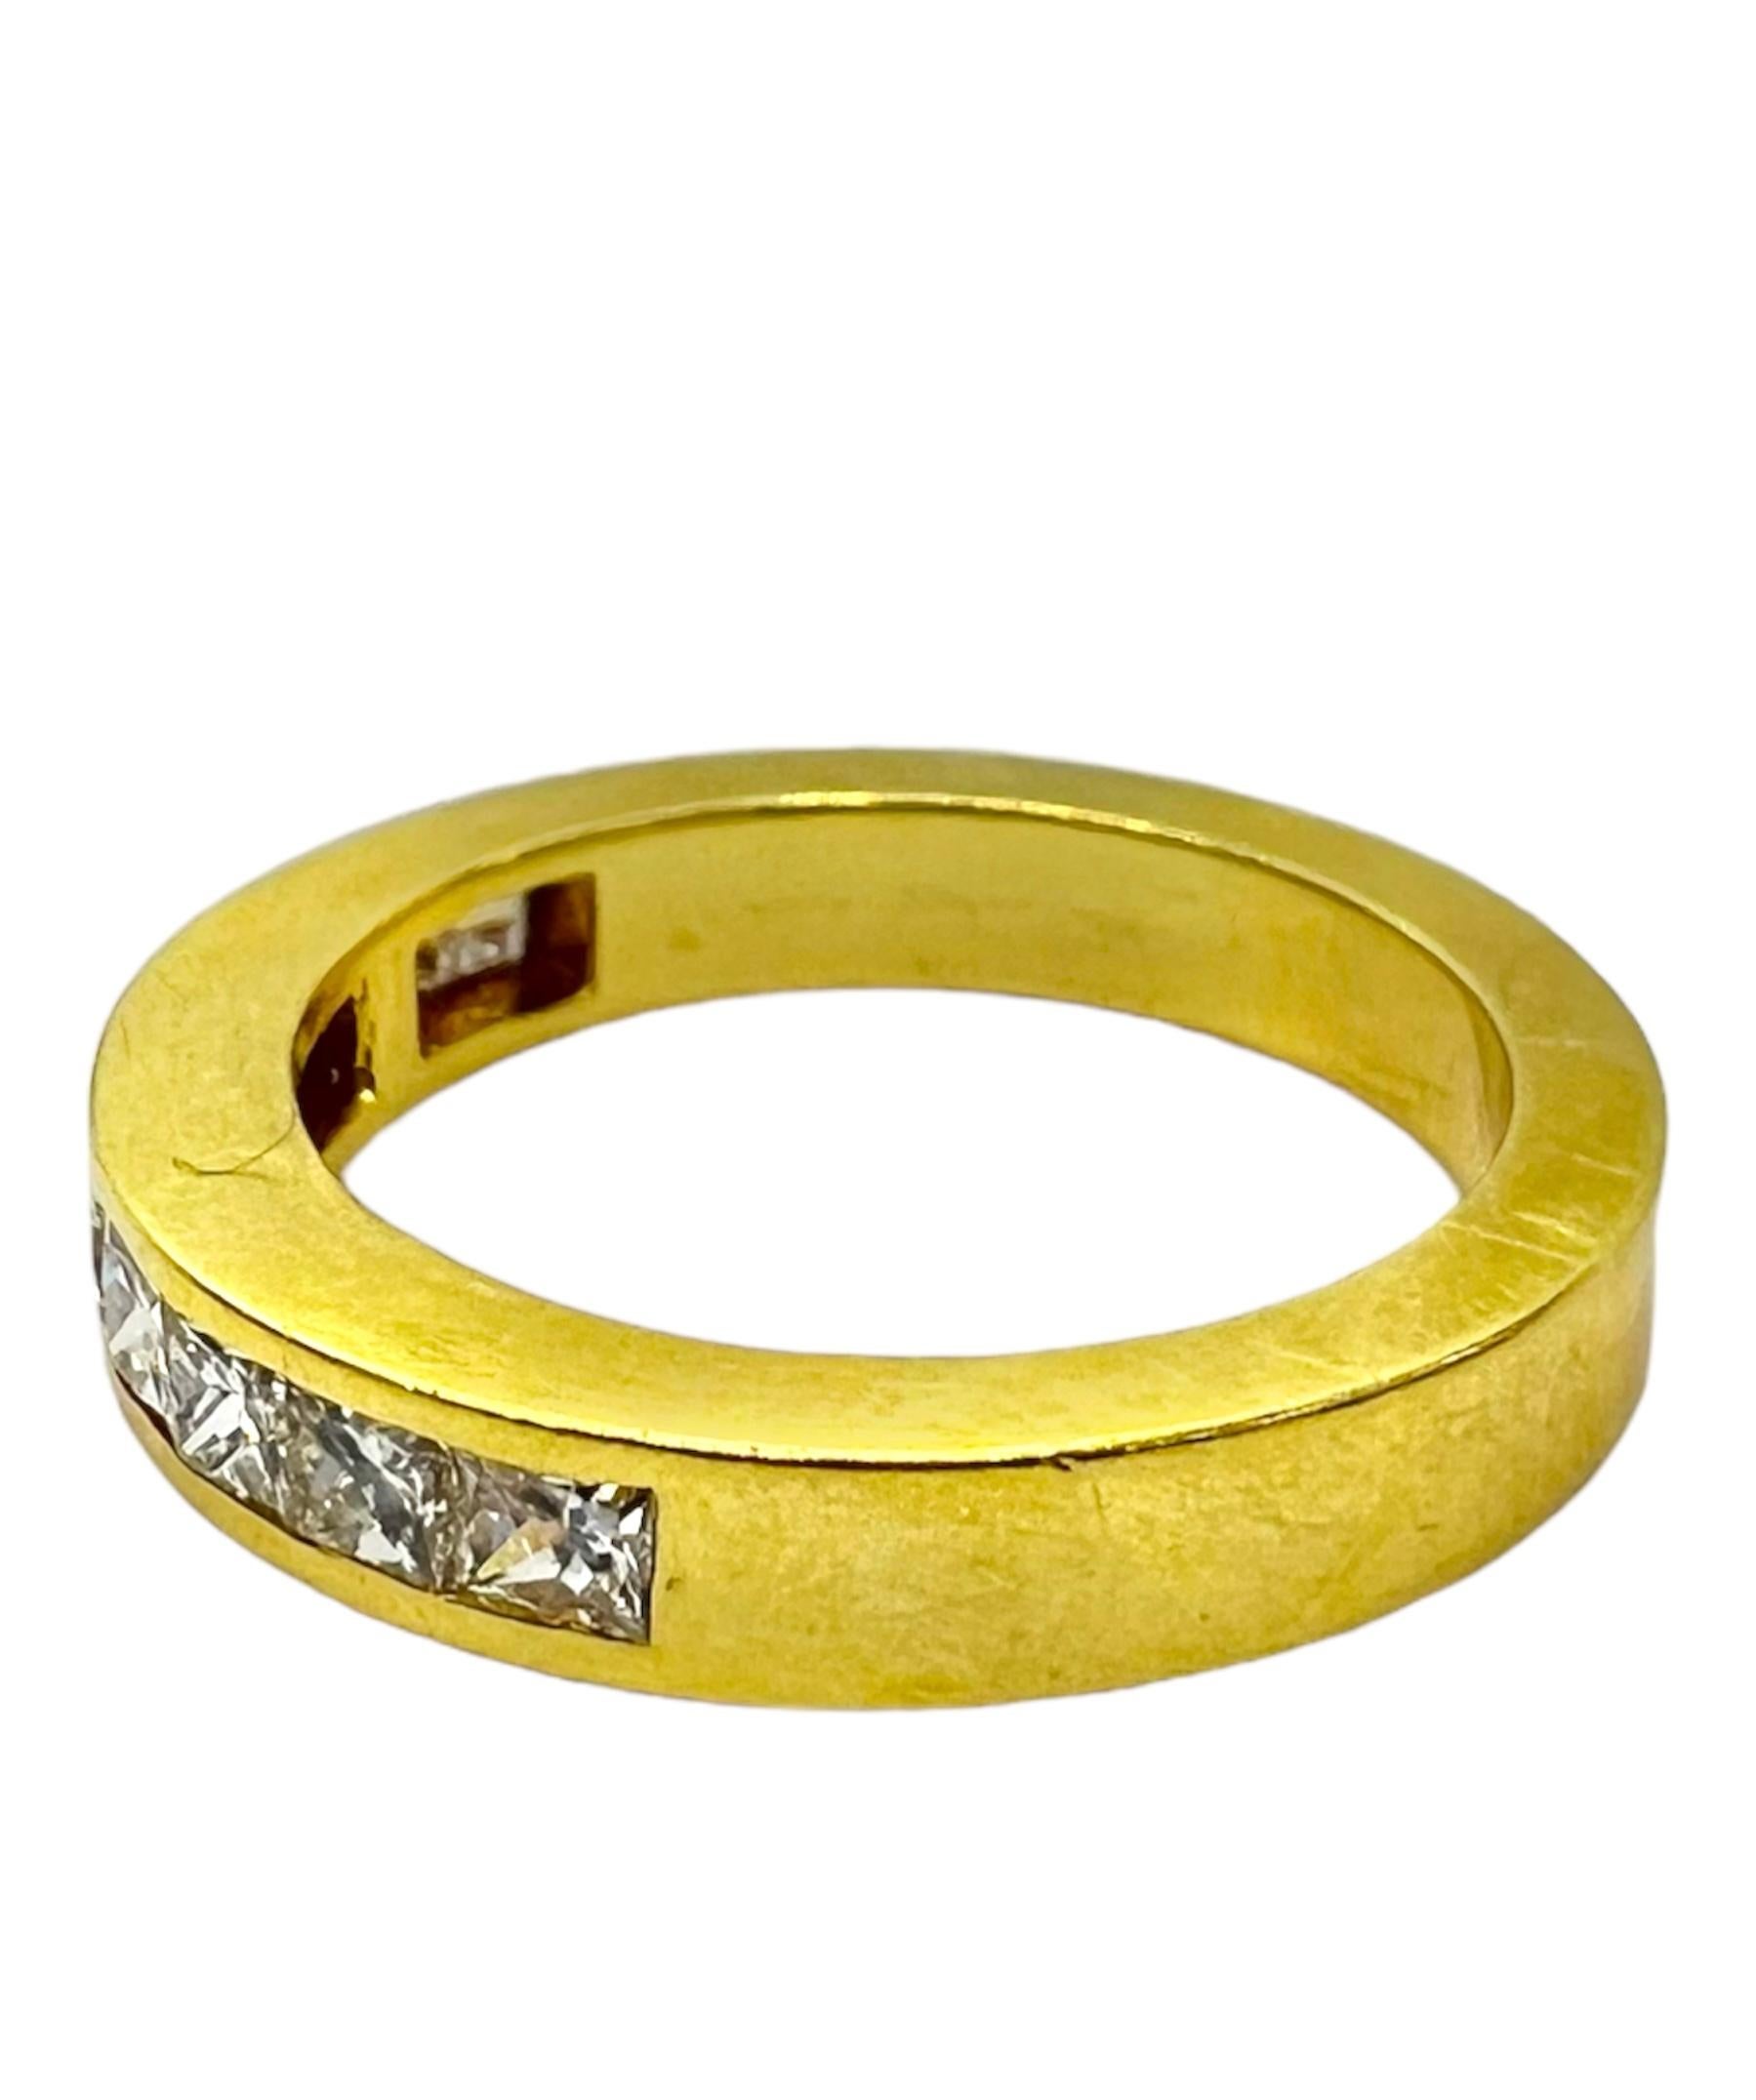 18K yellow gold band ring with square cut diamonds.

Sophia D by Joseph Dardashti LTD has been known worldwide for 35 years and are inspired by classic Art Deco design that merges with modern manufacturing techniques. 